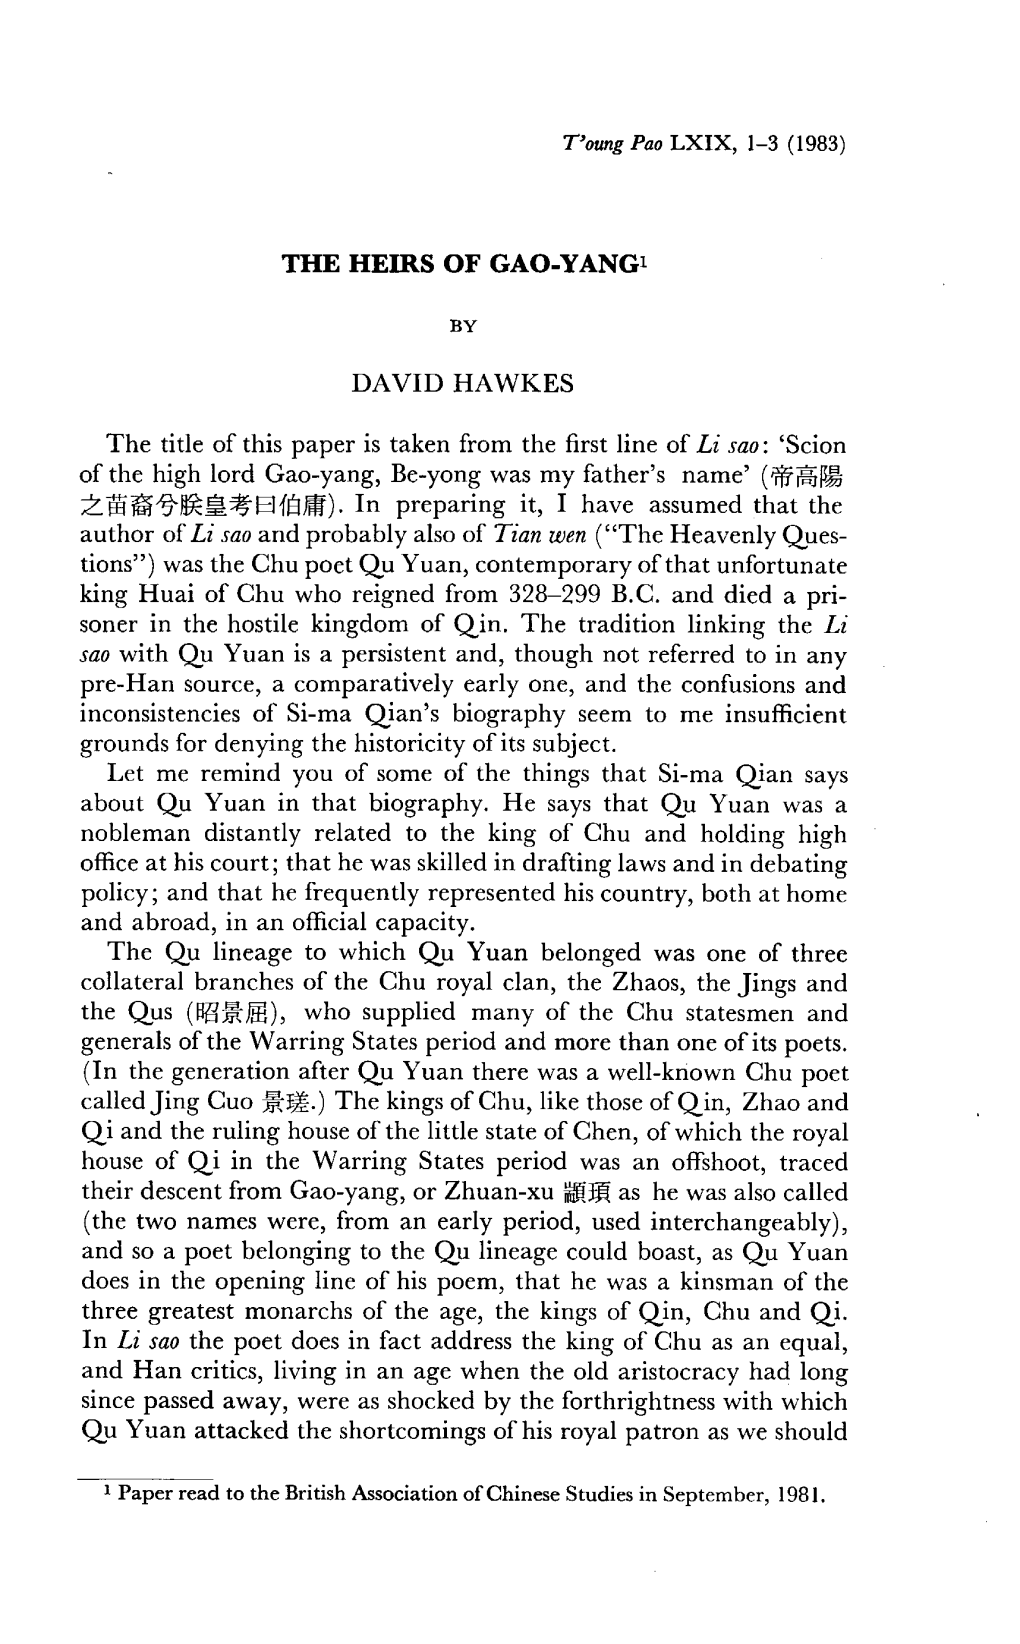 THE HEIRS of GAO-YANG1 by DAVID HAWKES the Title Of